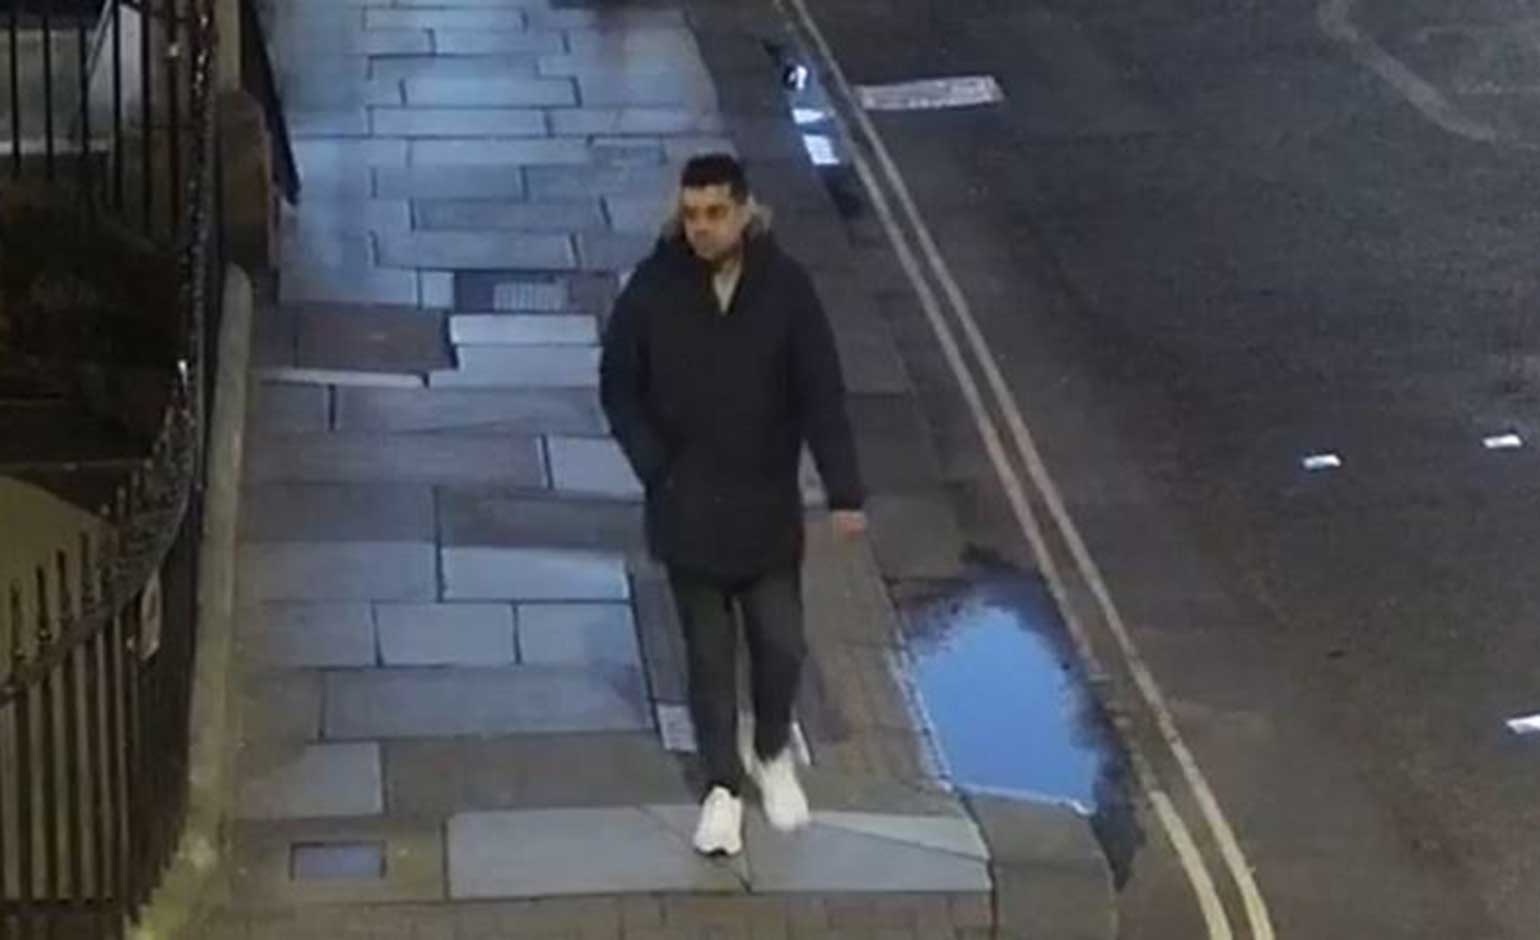 Man being sought by police in connection with sexual assault in Bath